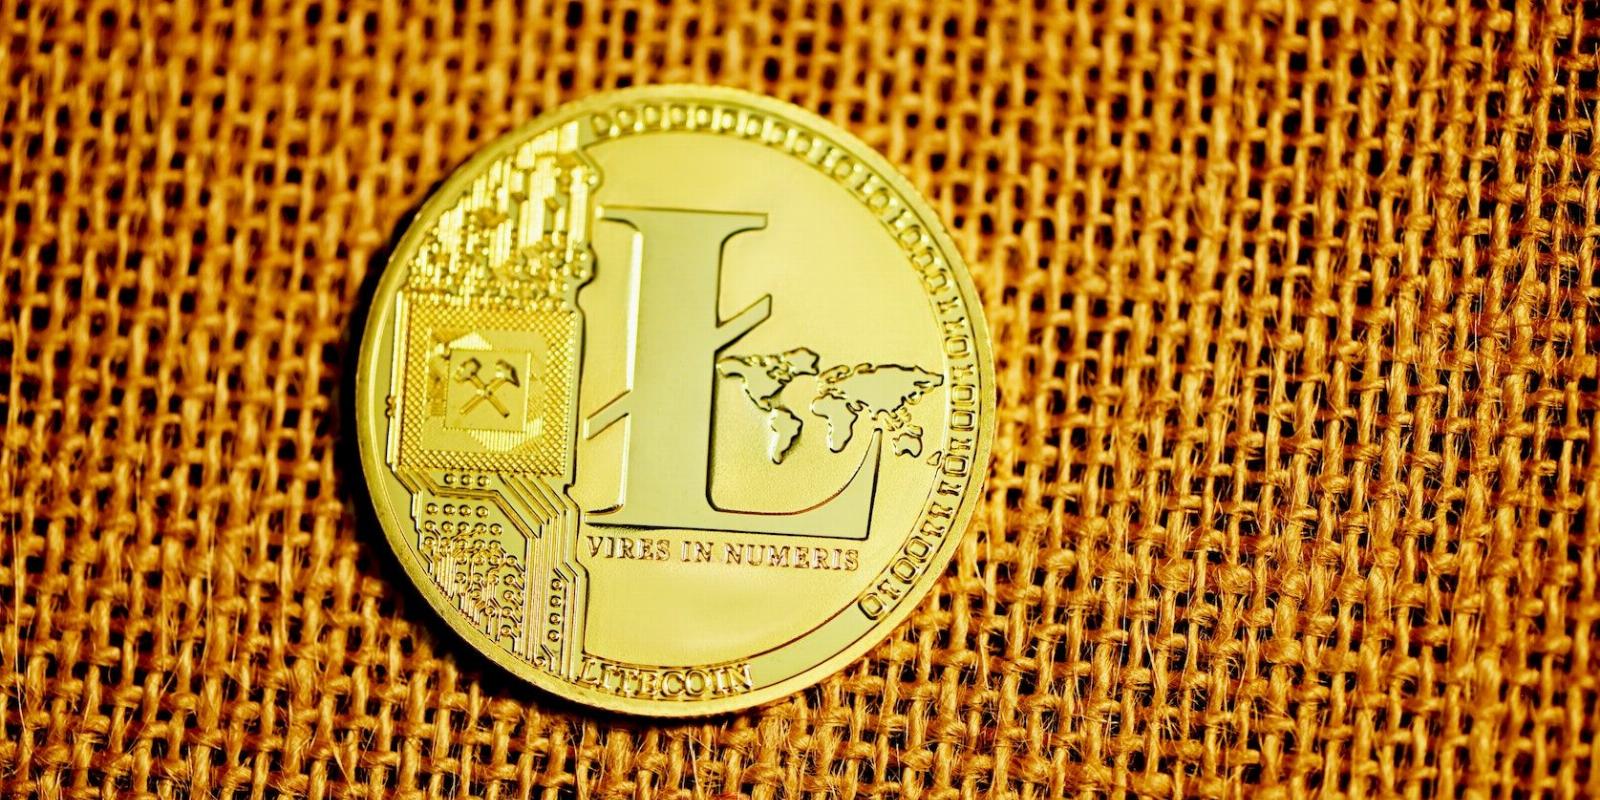 What Is Litecoin Halving? When Will the Litecoin Halving Happen?